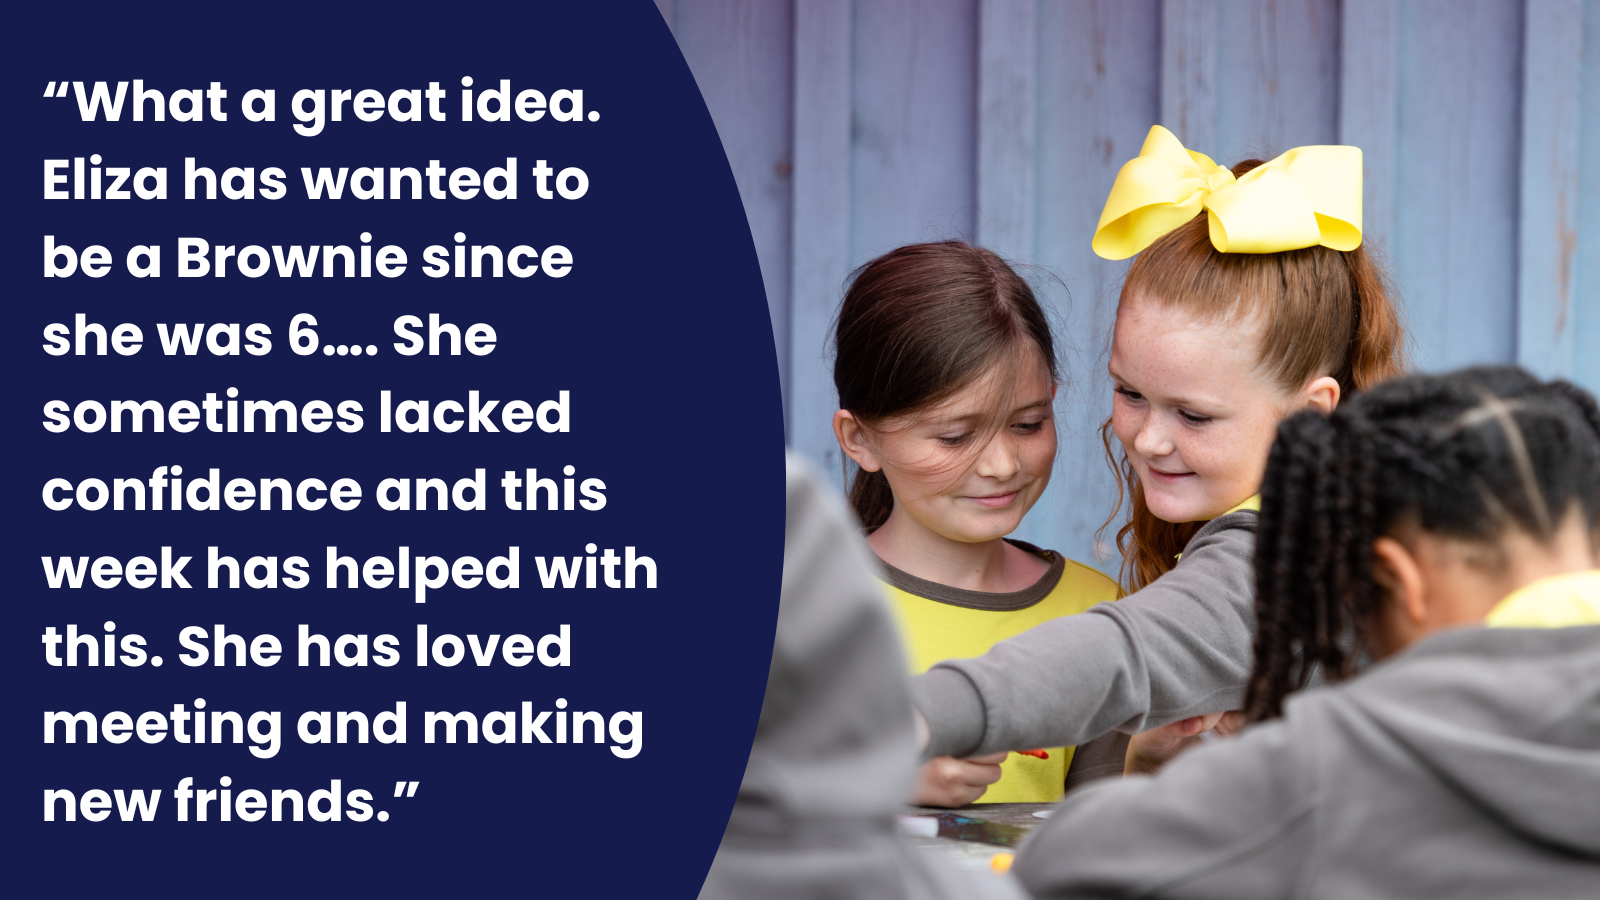 “What a great idea. Eliza has wanted to be a Brownie since she was 6…. She sometimes lacked confidence and this week has helped with this. She has loved meeting and making new friends.”